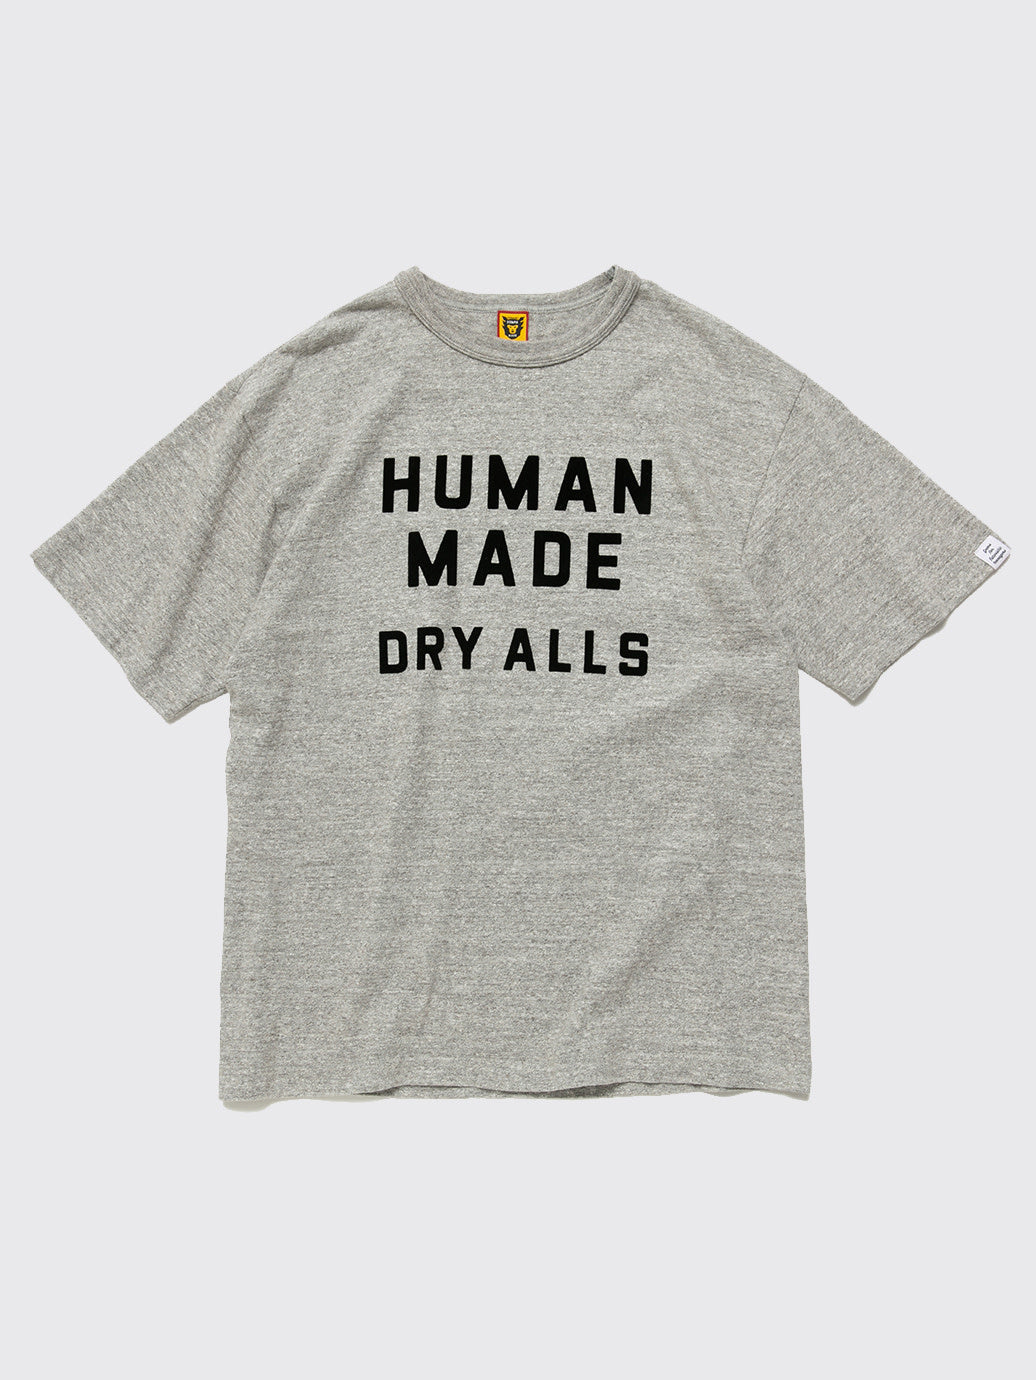 Human Made Dry Alls T-Shirt #2314 SS22 Grey – OALLERY